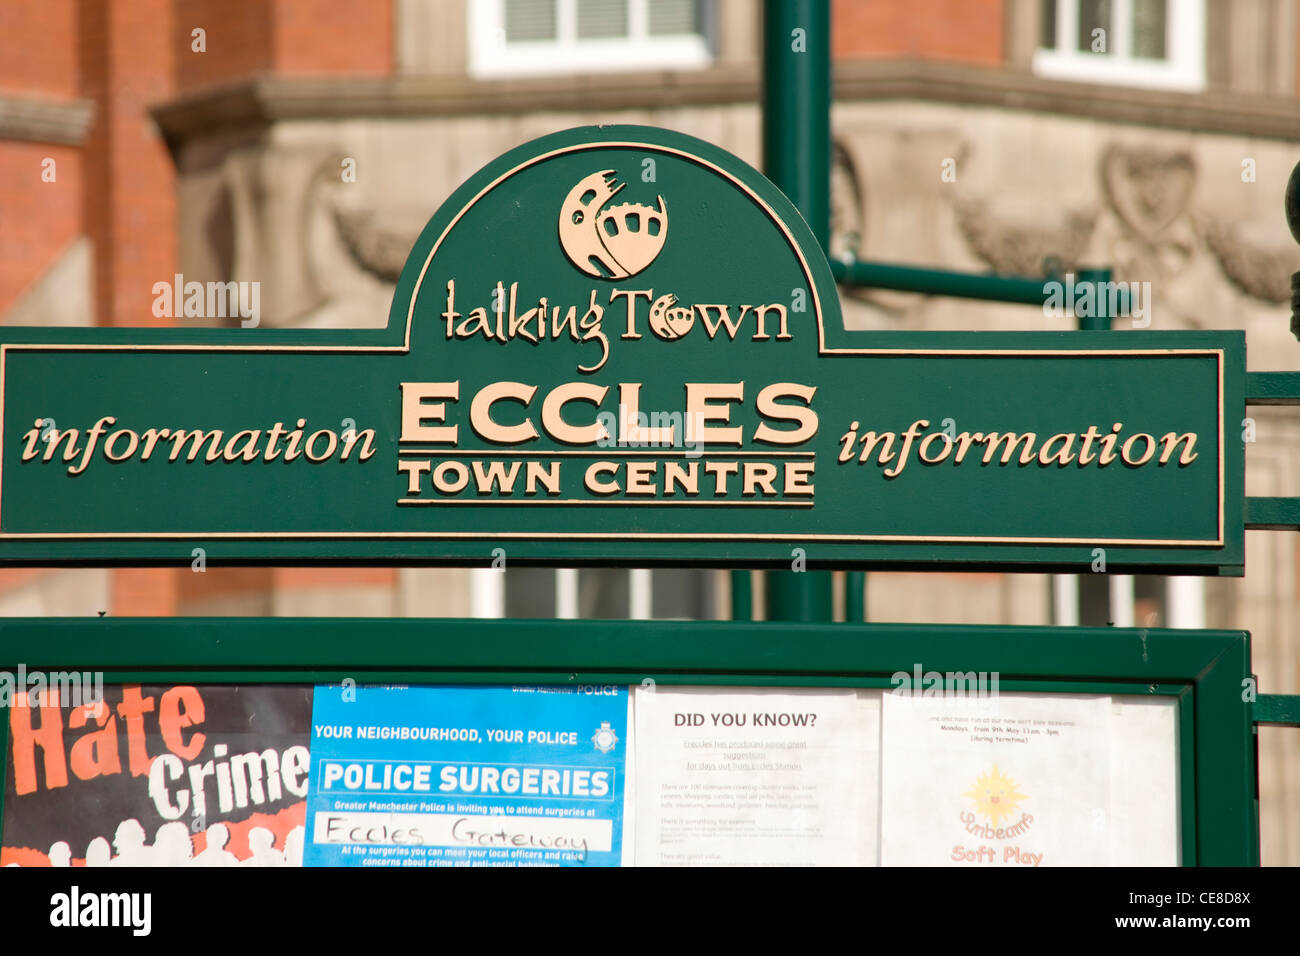 Eccles town centre sign, Manchester Stock Photo